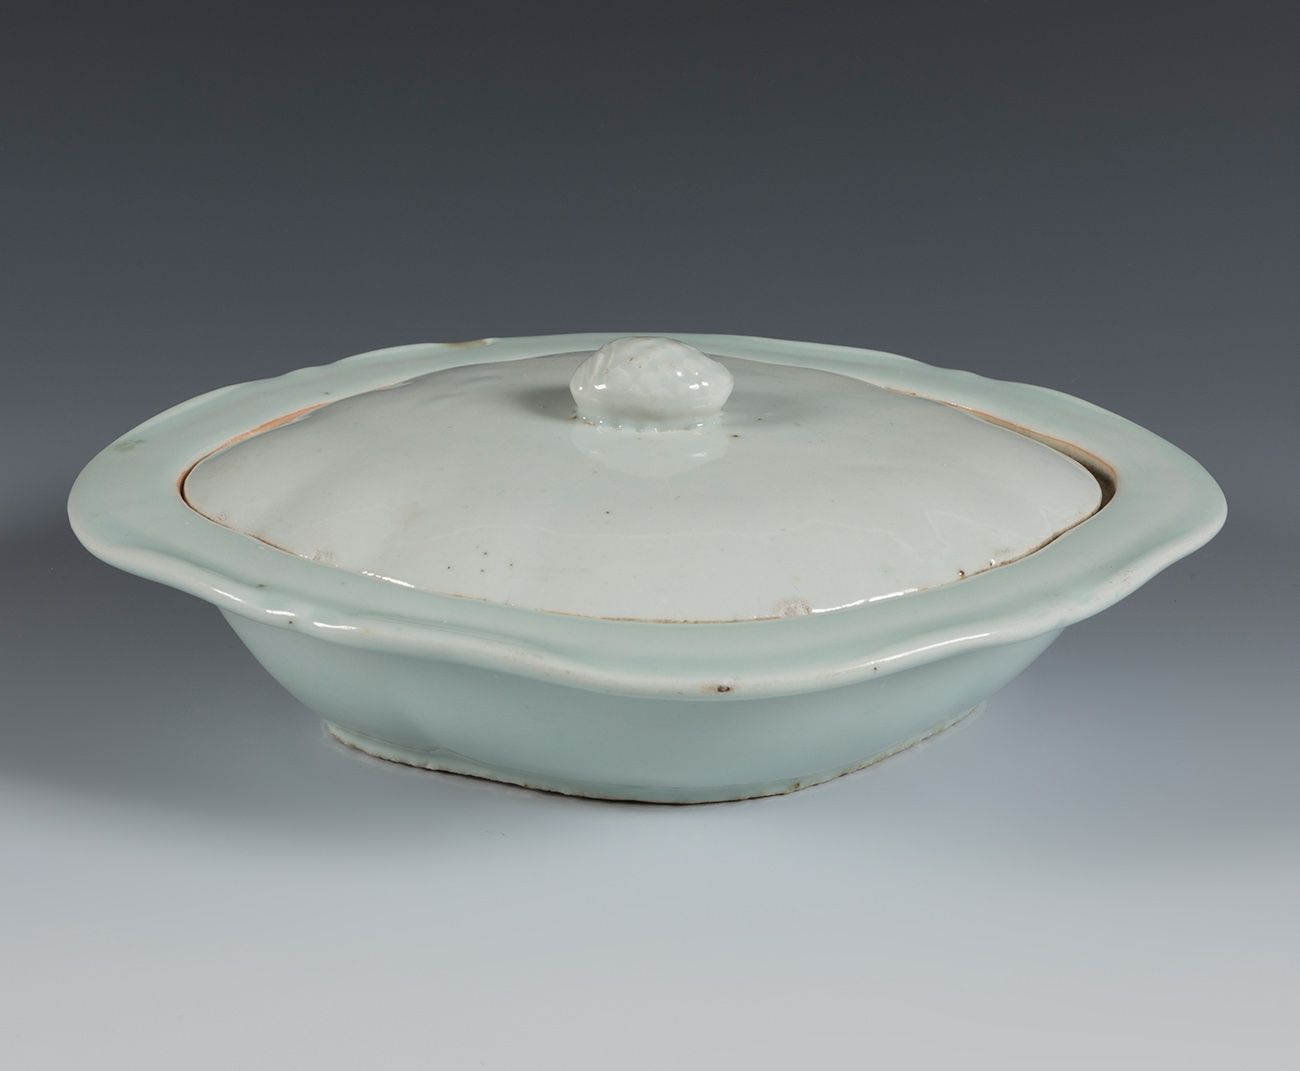 Null Celadon fountain with lid. China, 19th century.
Celadon porcelain.
Slightly&hellip;